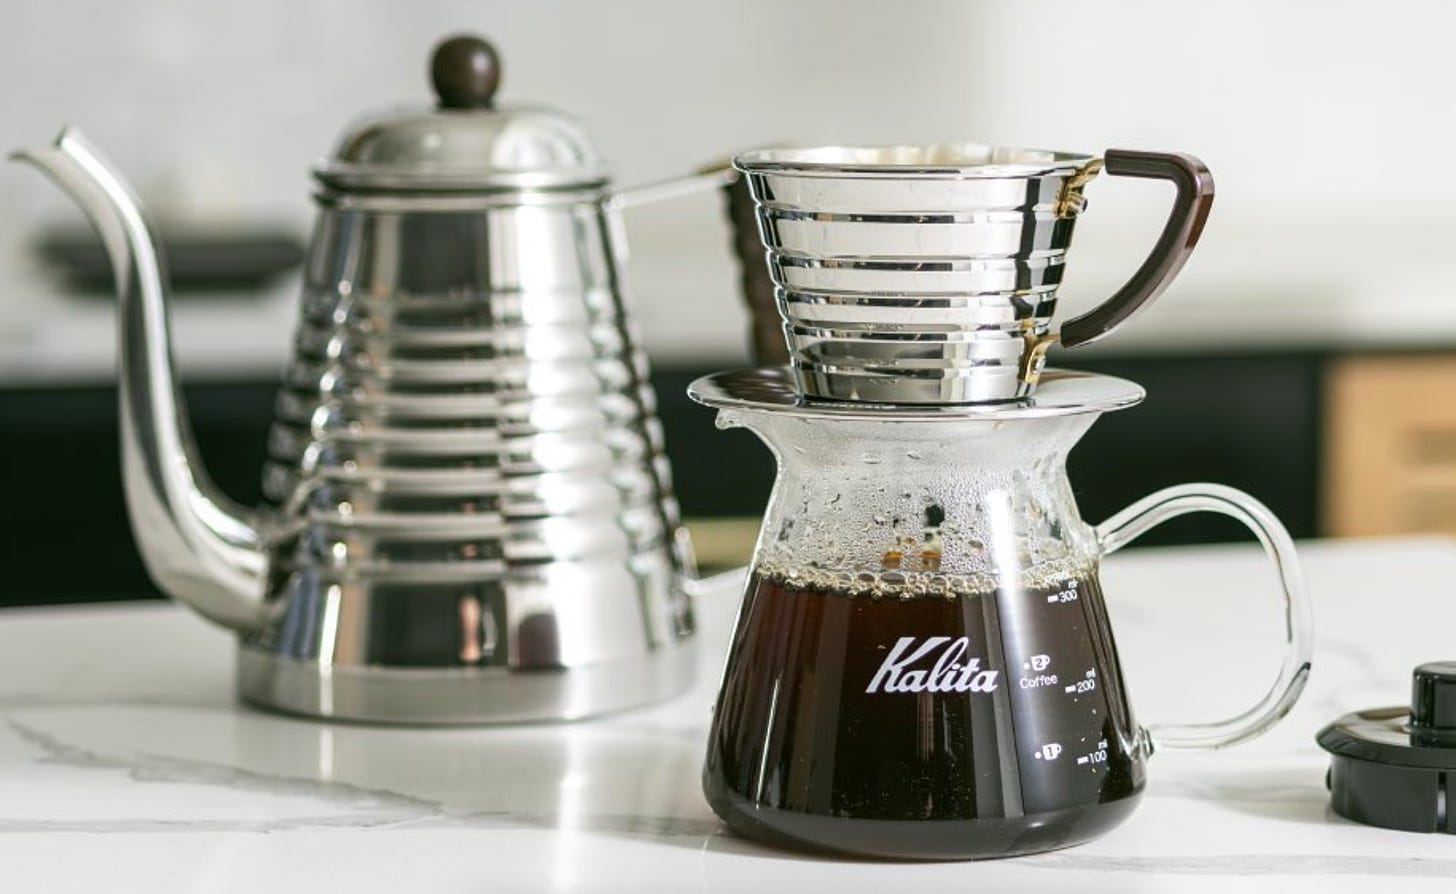 A silver water kettle is blurred in the background (left) on a white marble countertop. A silver cone-shaped pour over coffee brewing device with ridges called the Kalita Wave sits on a glass Kalita branded coffee beaker filled 2/3rds of the way up.